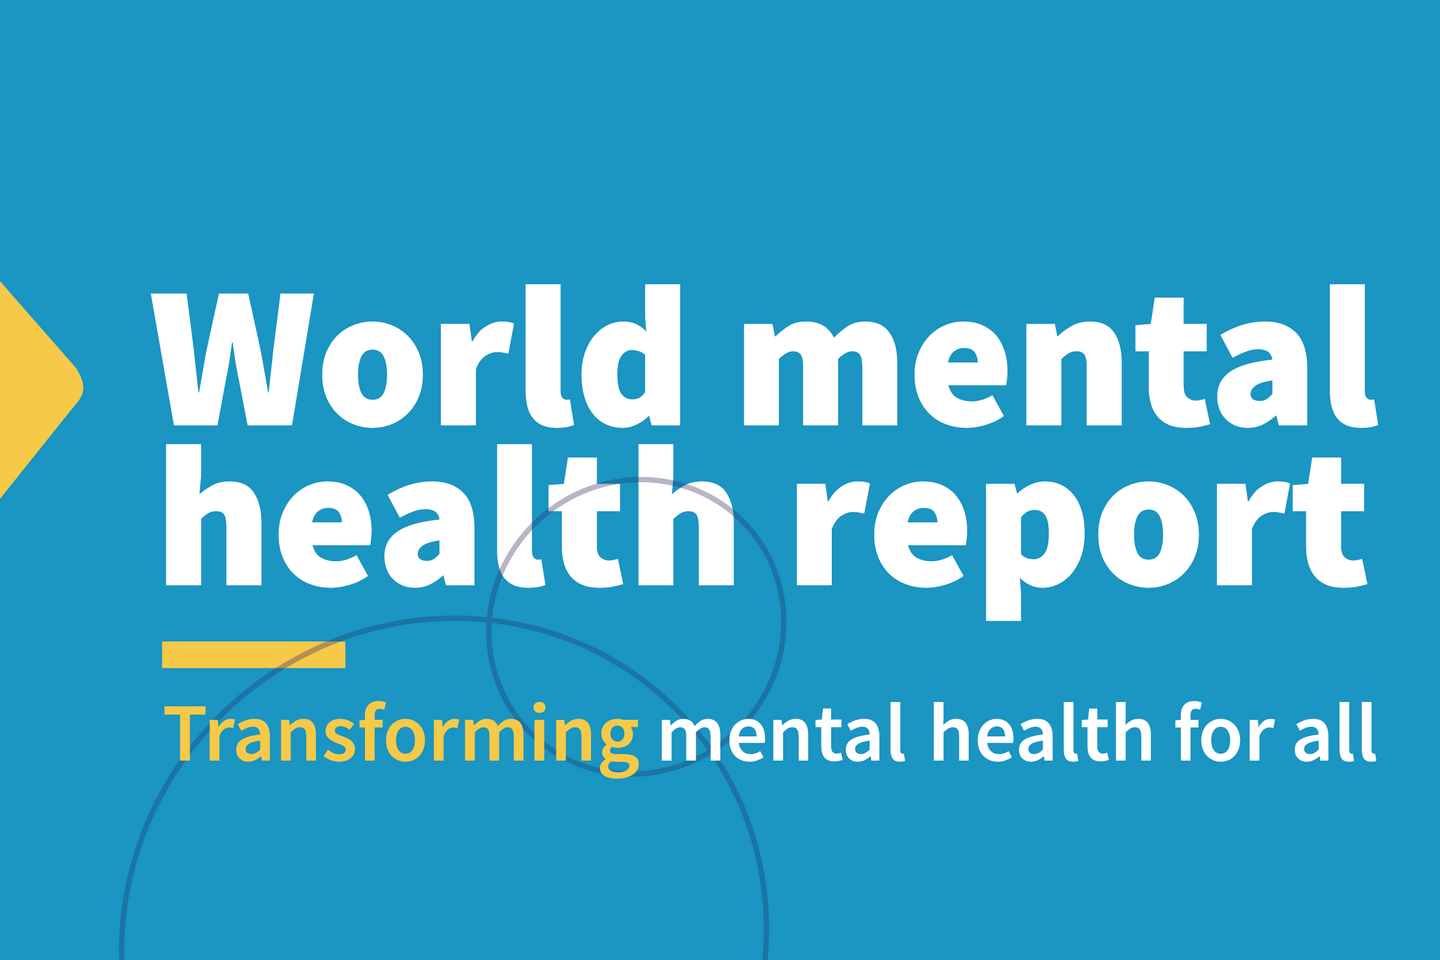 World mental health report : Transforming mental health for all